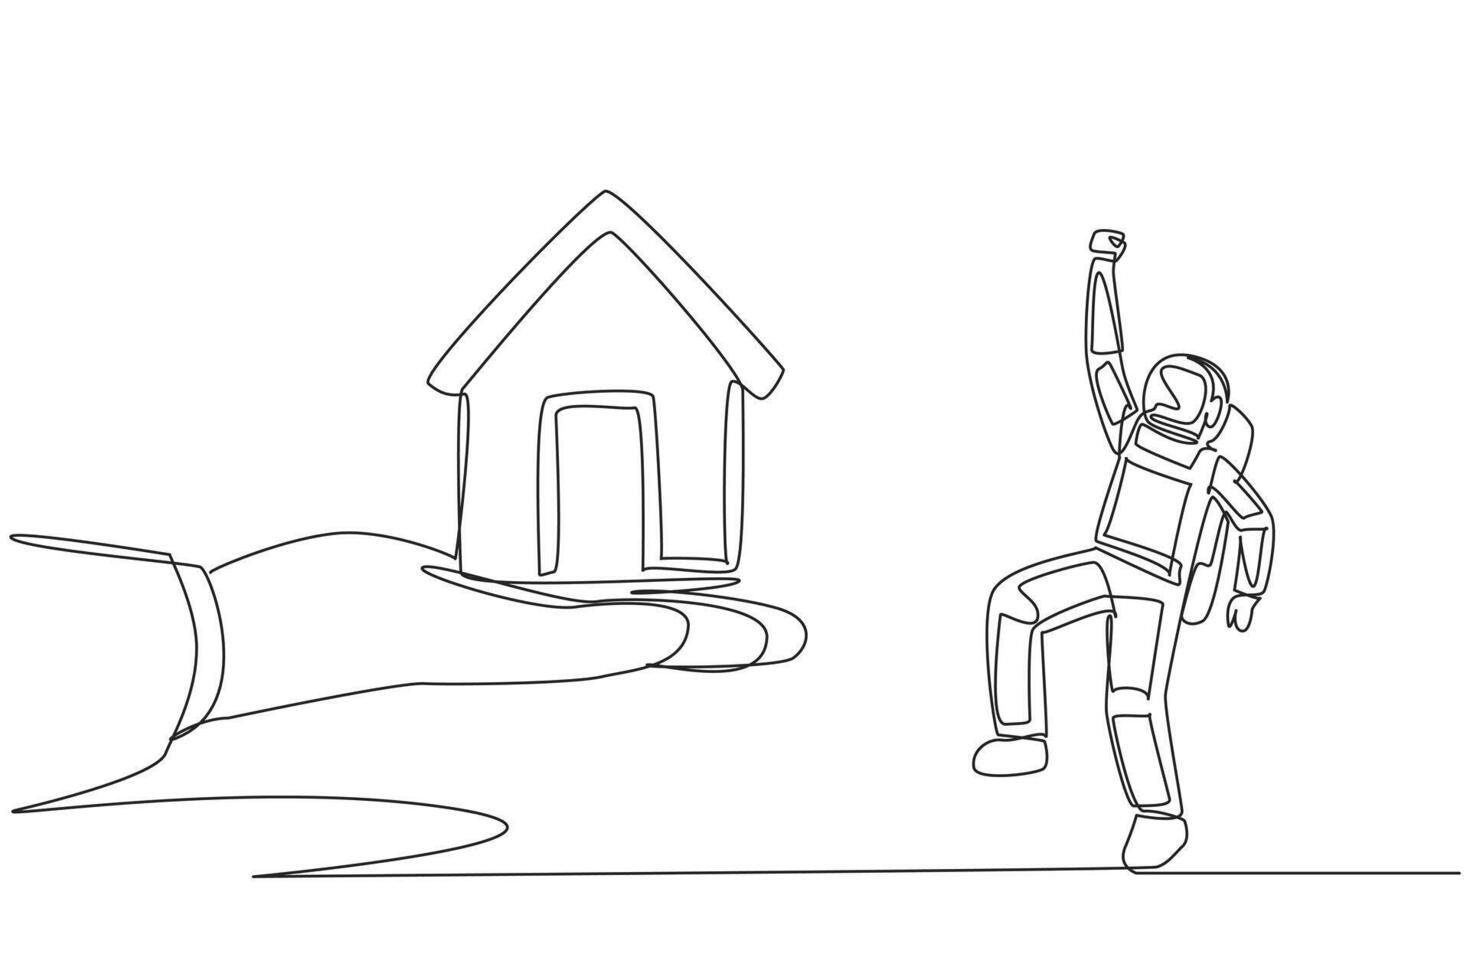 Continuous one line drawing the astronaut excited to get a miniature house from giant hand. The astronaut arrives back home. Rest. Cosmonaut outer space. Single line draw design illustration vector